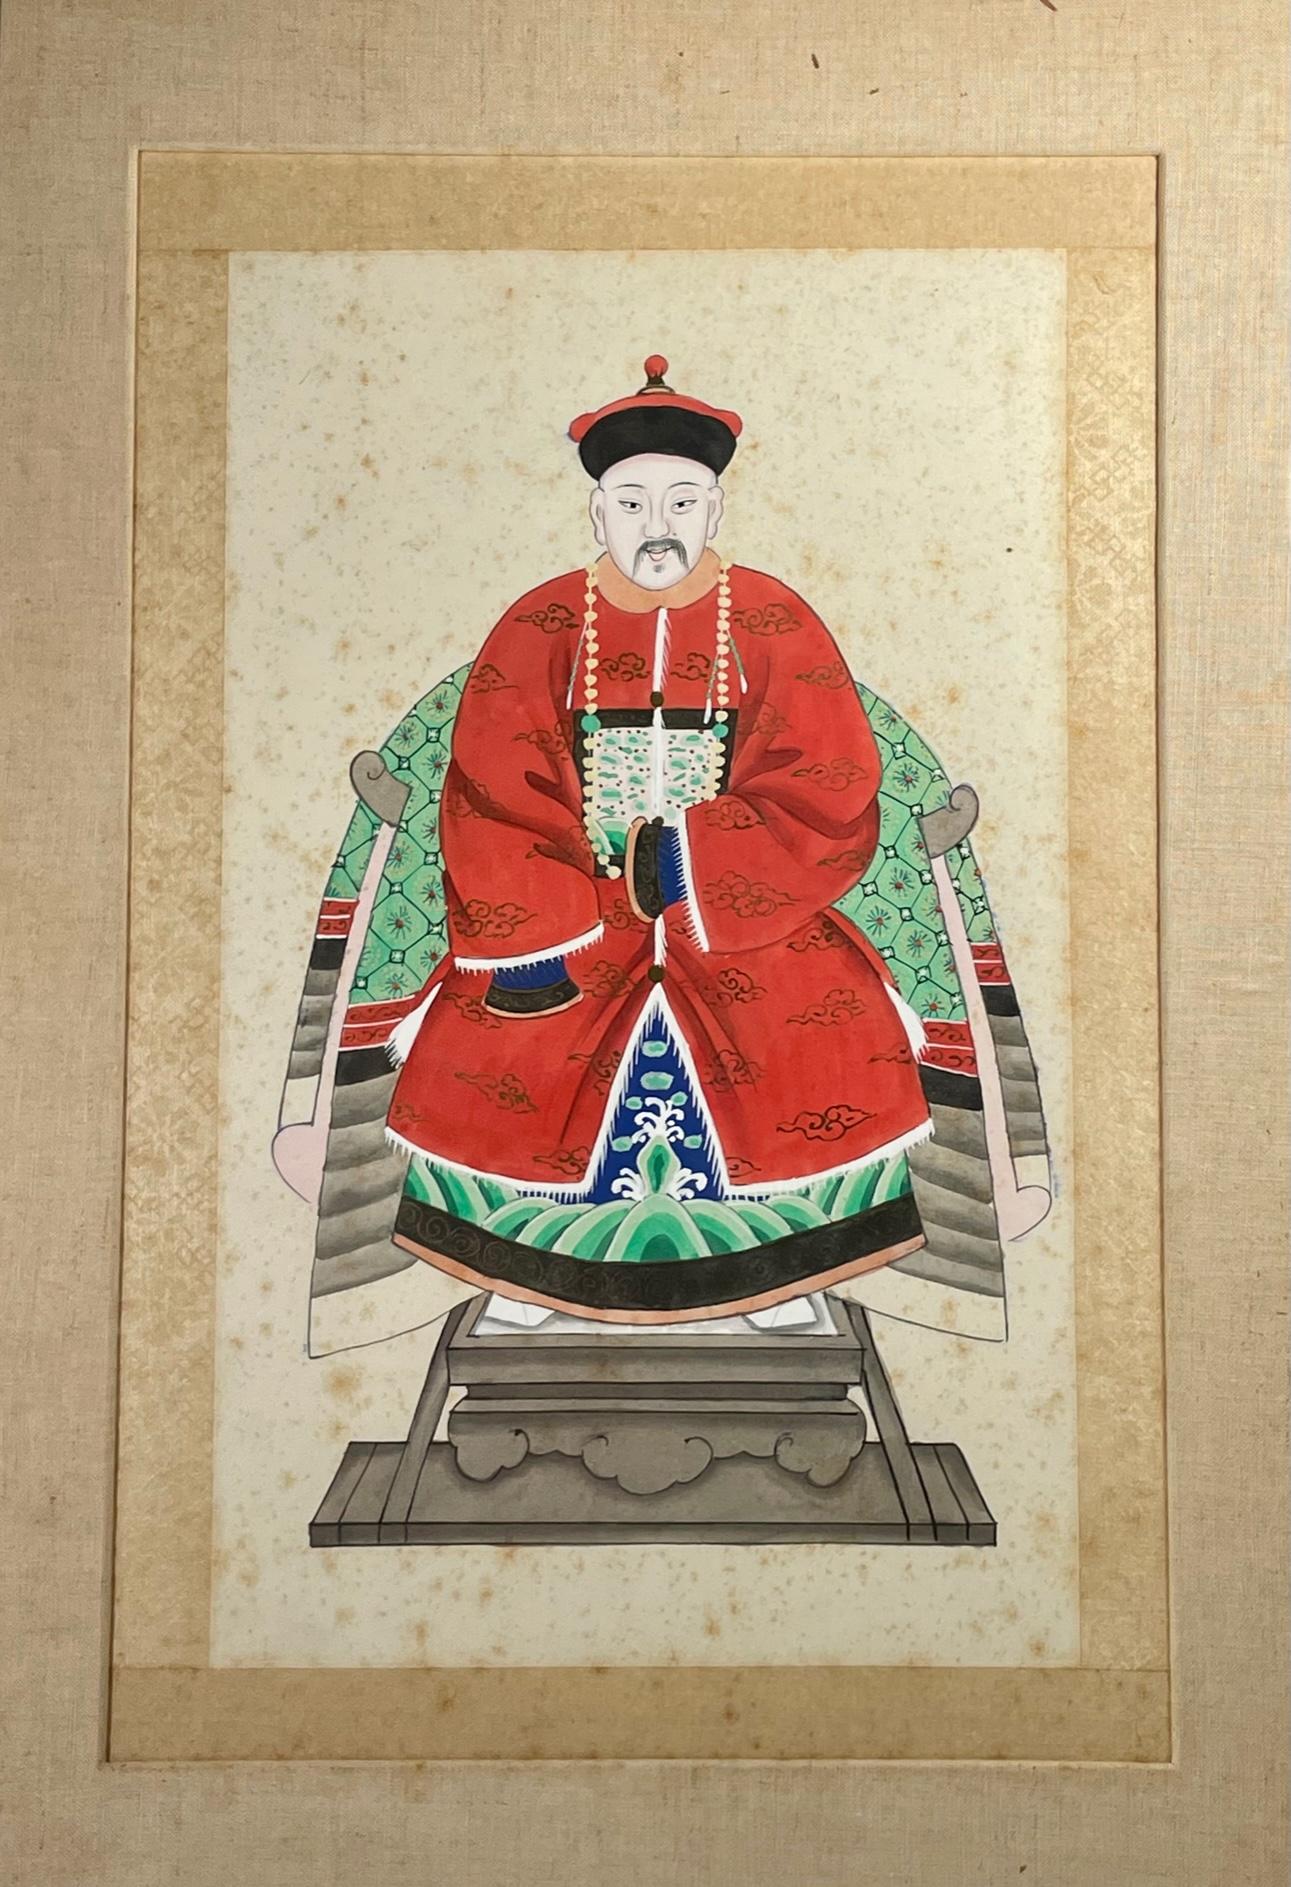 Chinese ancestor portrait of a Mandarin Dignitary. 

Antique tempera on paper painting of a Mandarin Dignitary wearing a red court dress and seated on a throne chair. Based on the style of his formal robe, this man was probably an official of the